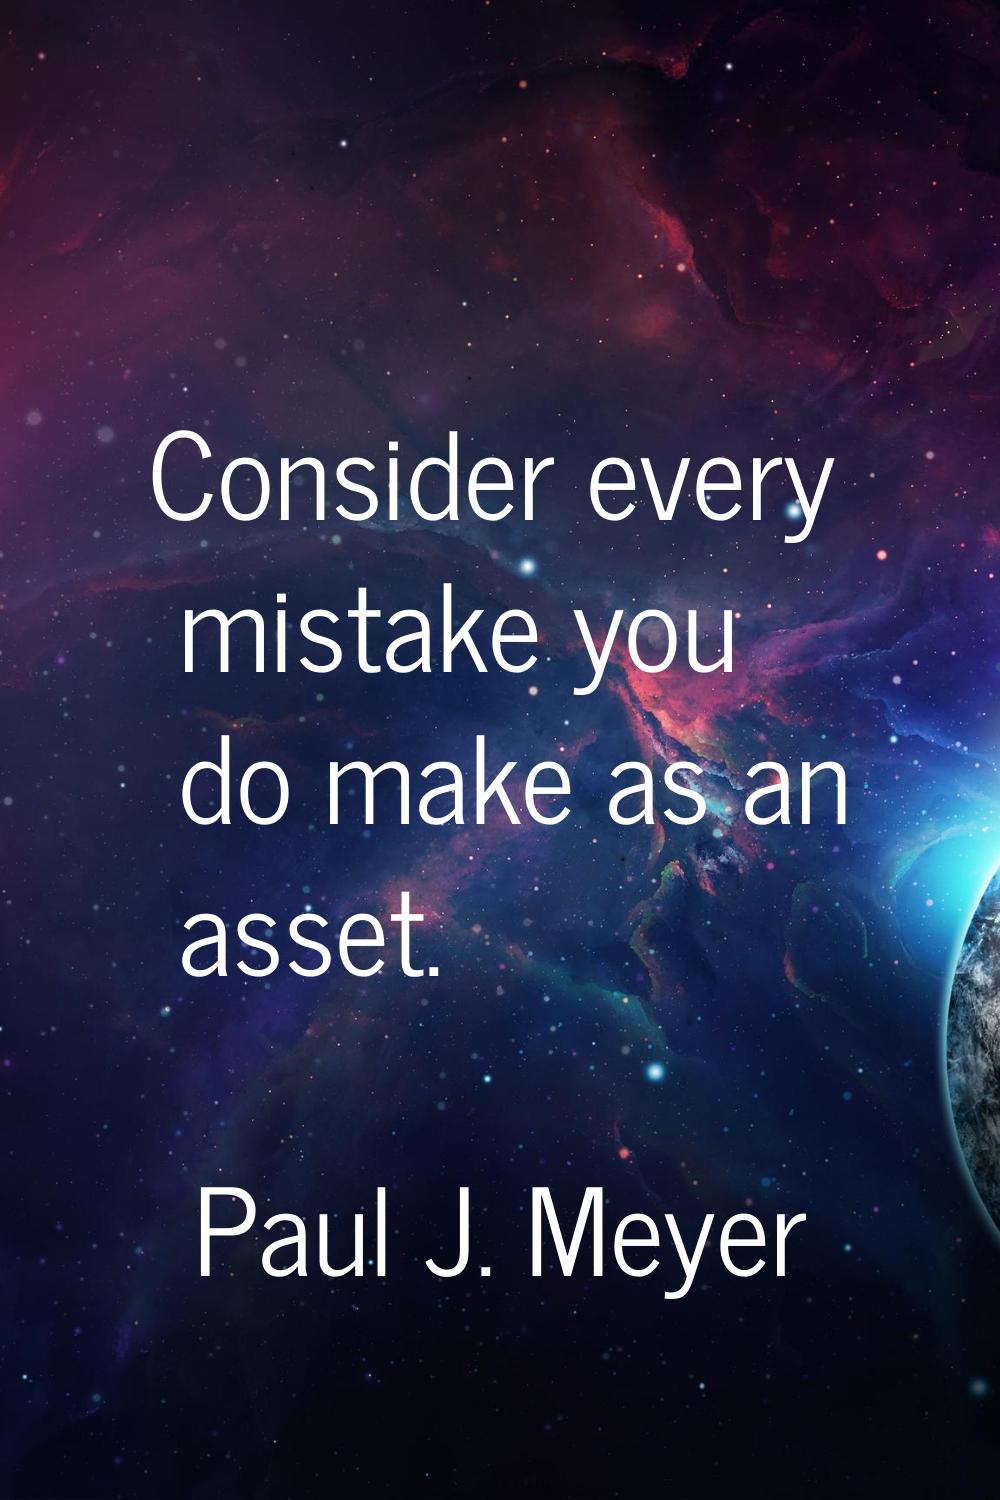 Consider every mistake you do make as an asset.